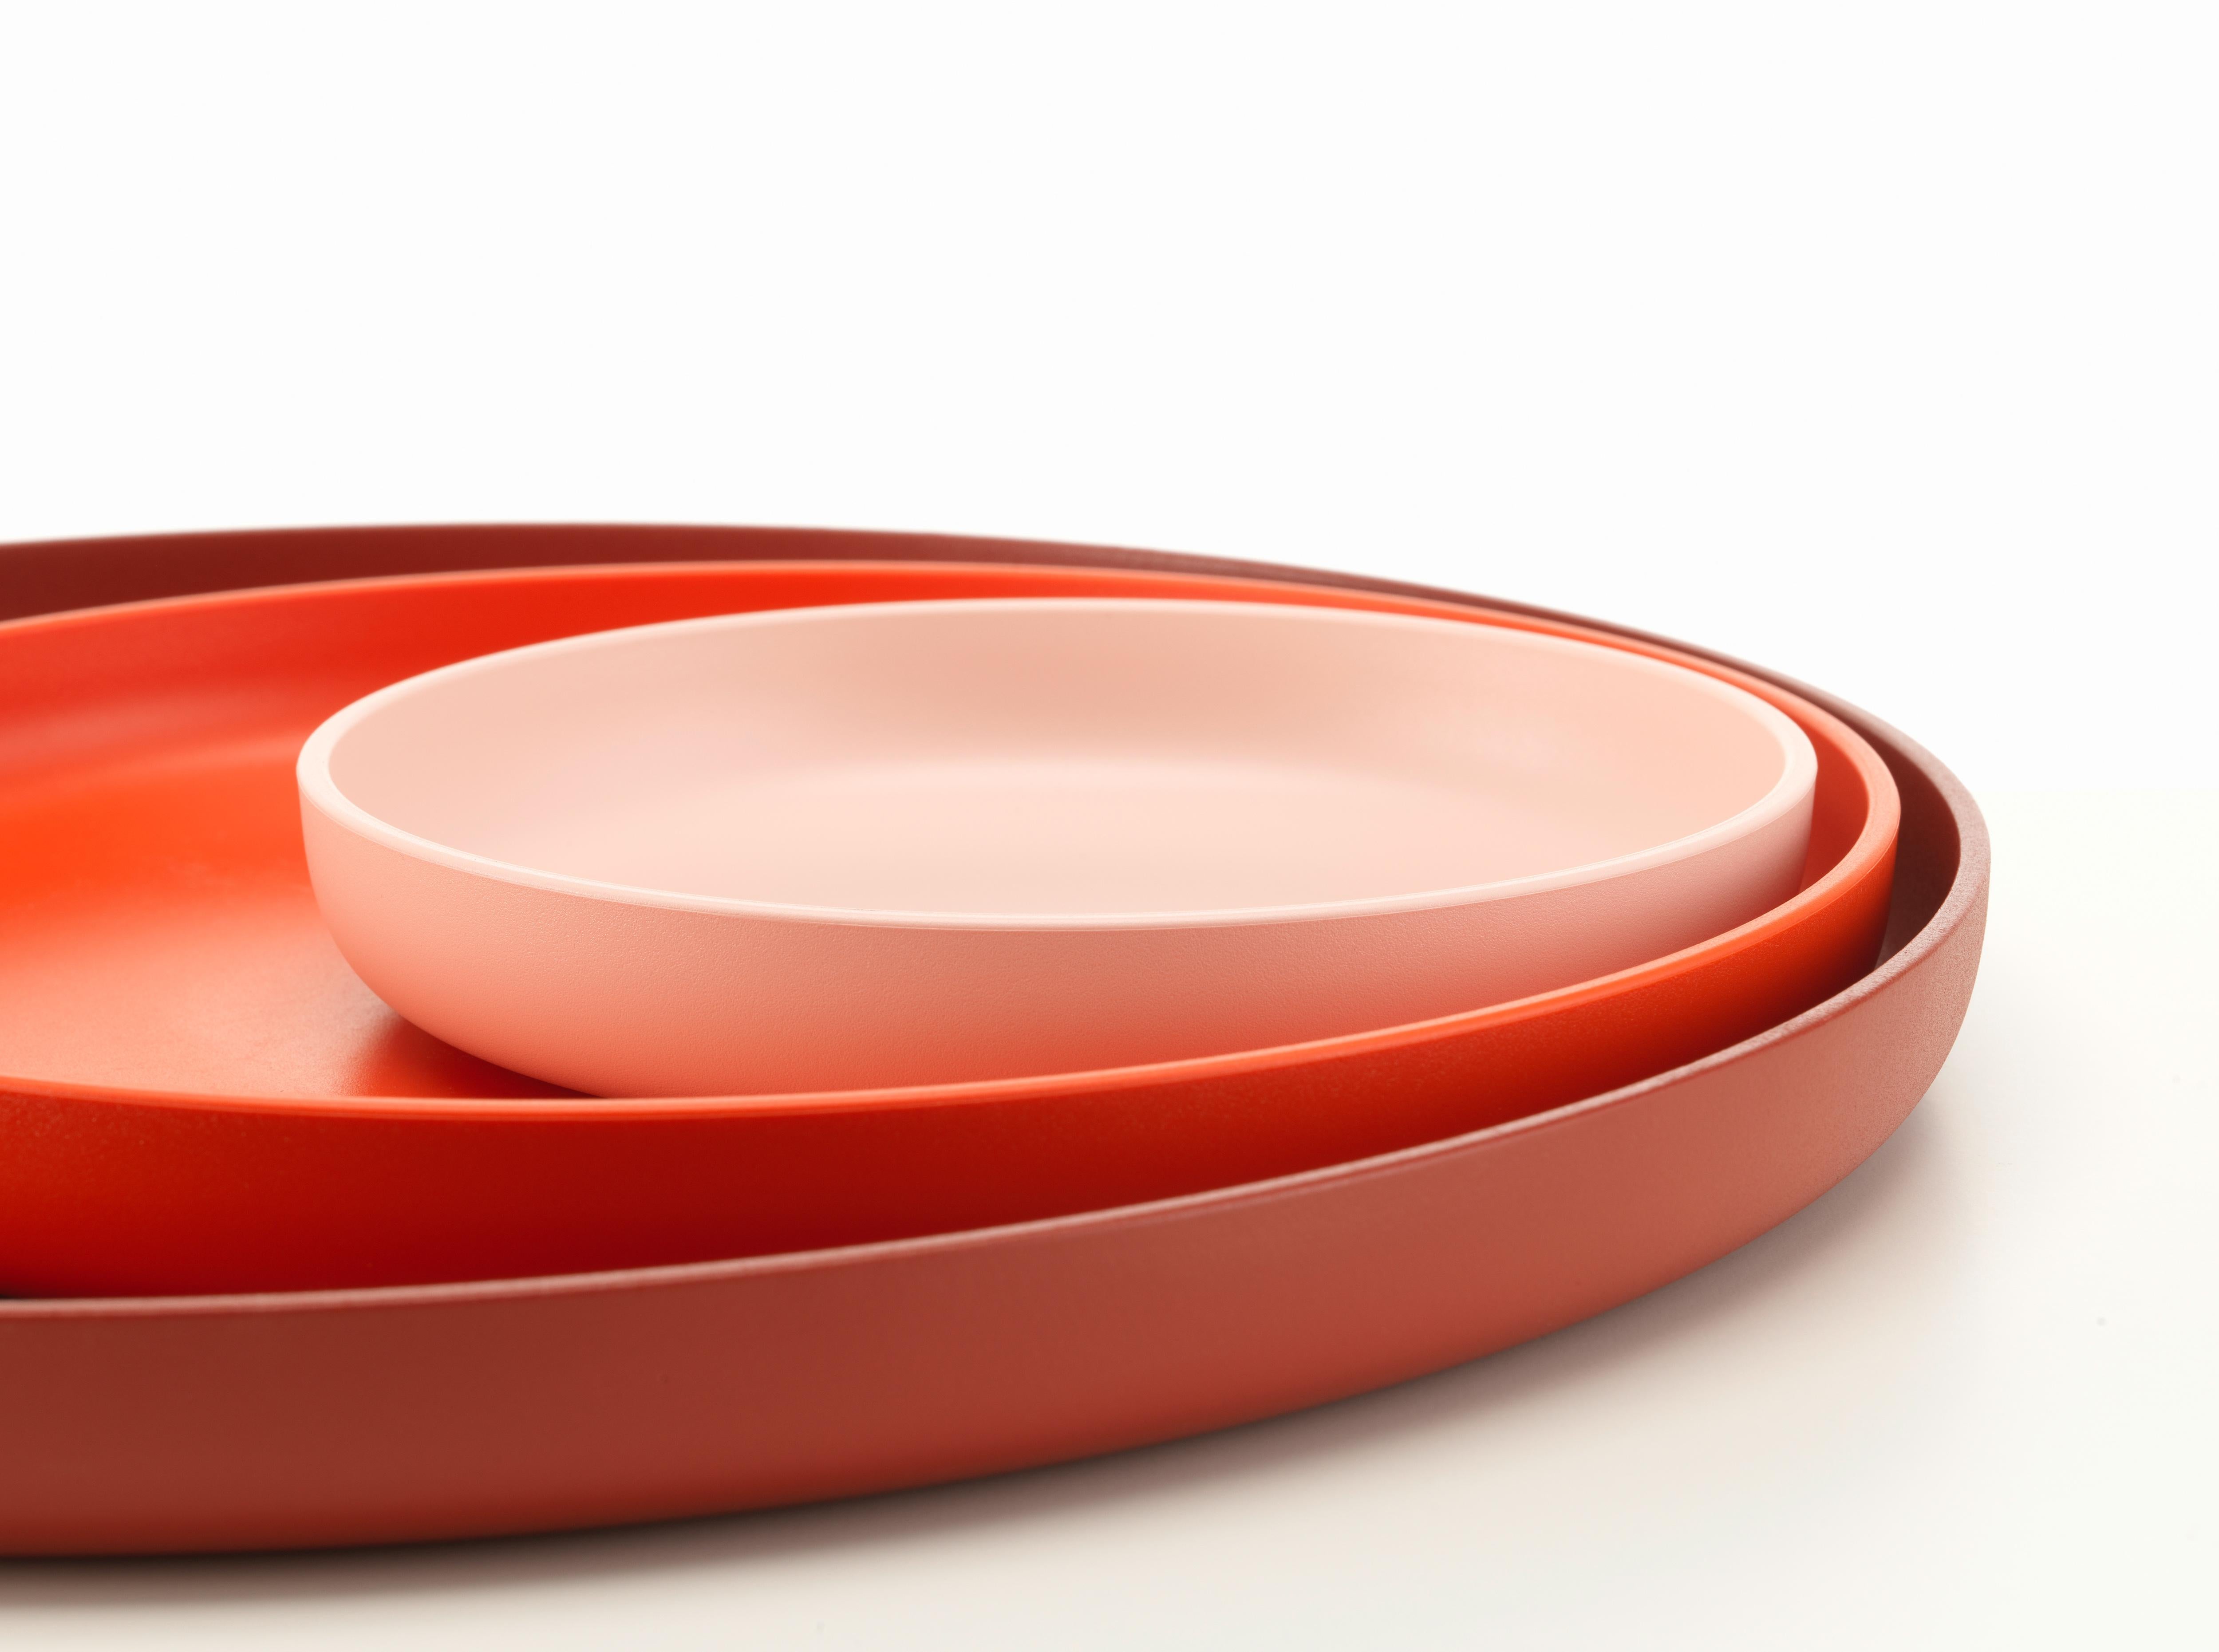 These products are only available in the United States.

At first glance, the Trays appear to be simple, flat dishes made of plastic. They were, however, developed by Jasper Morrison as a set of three, in carefully harmonized colors and sizes, in